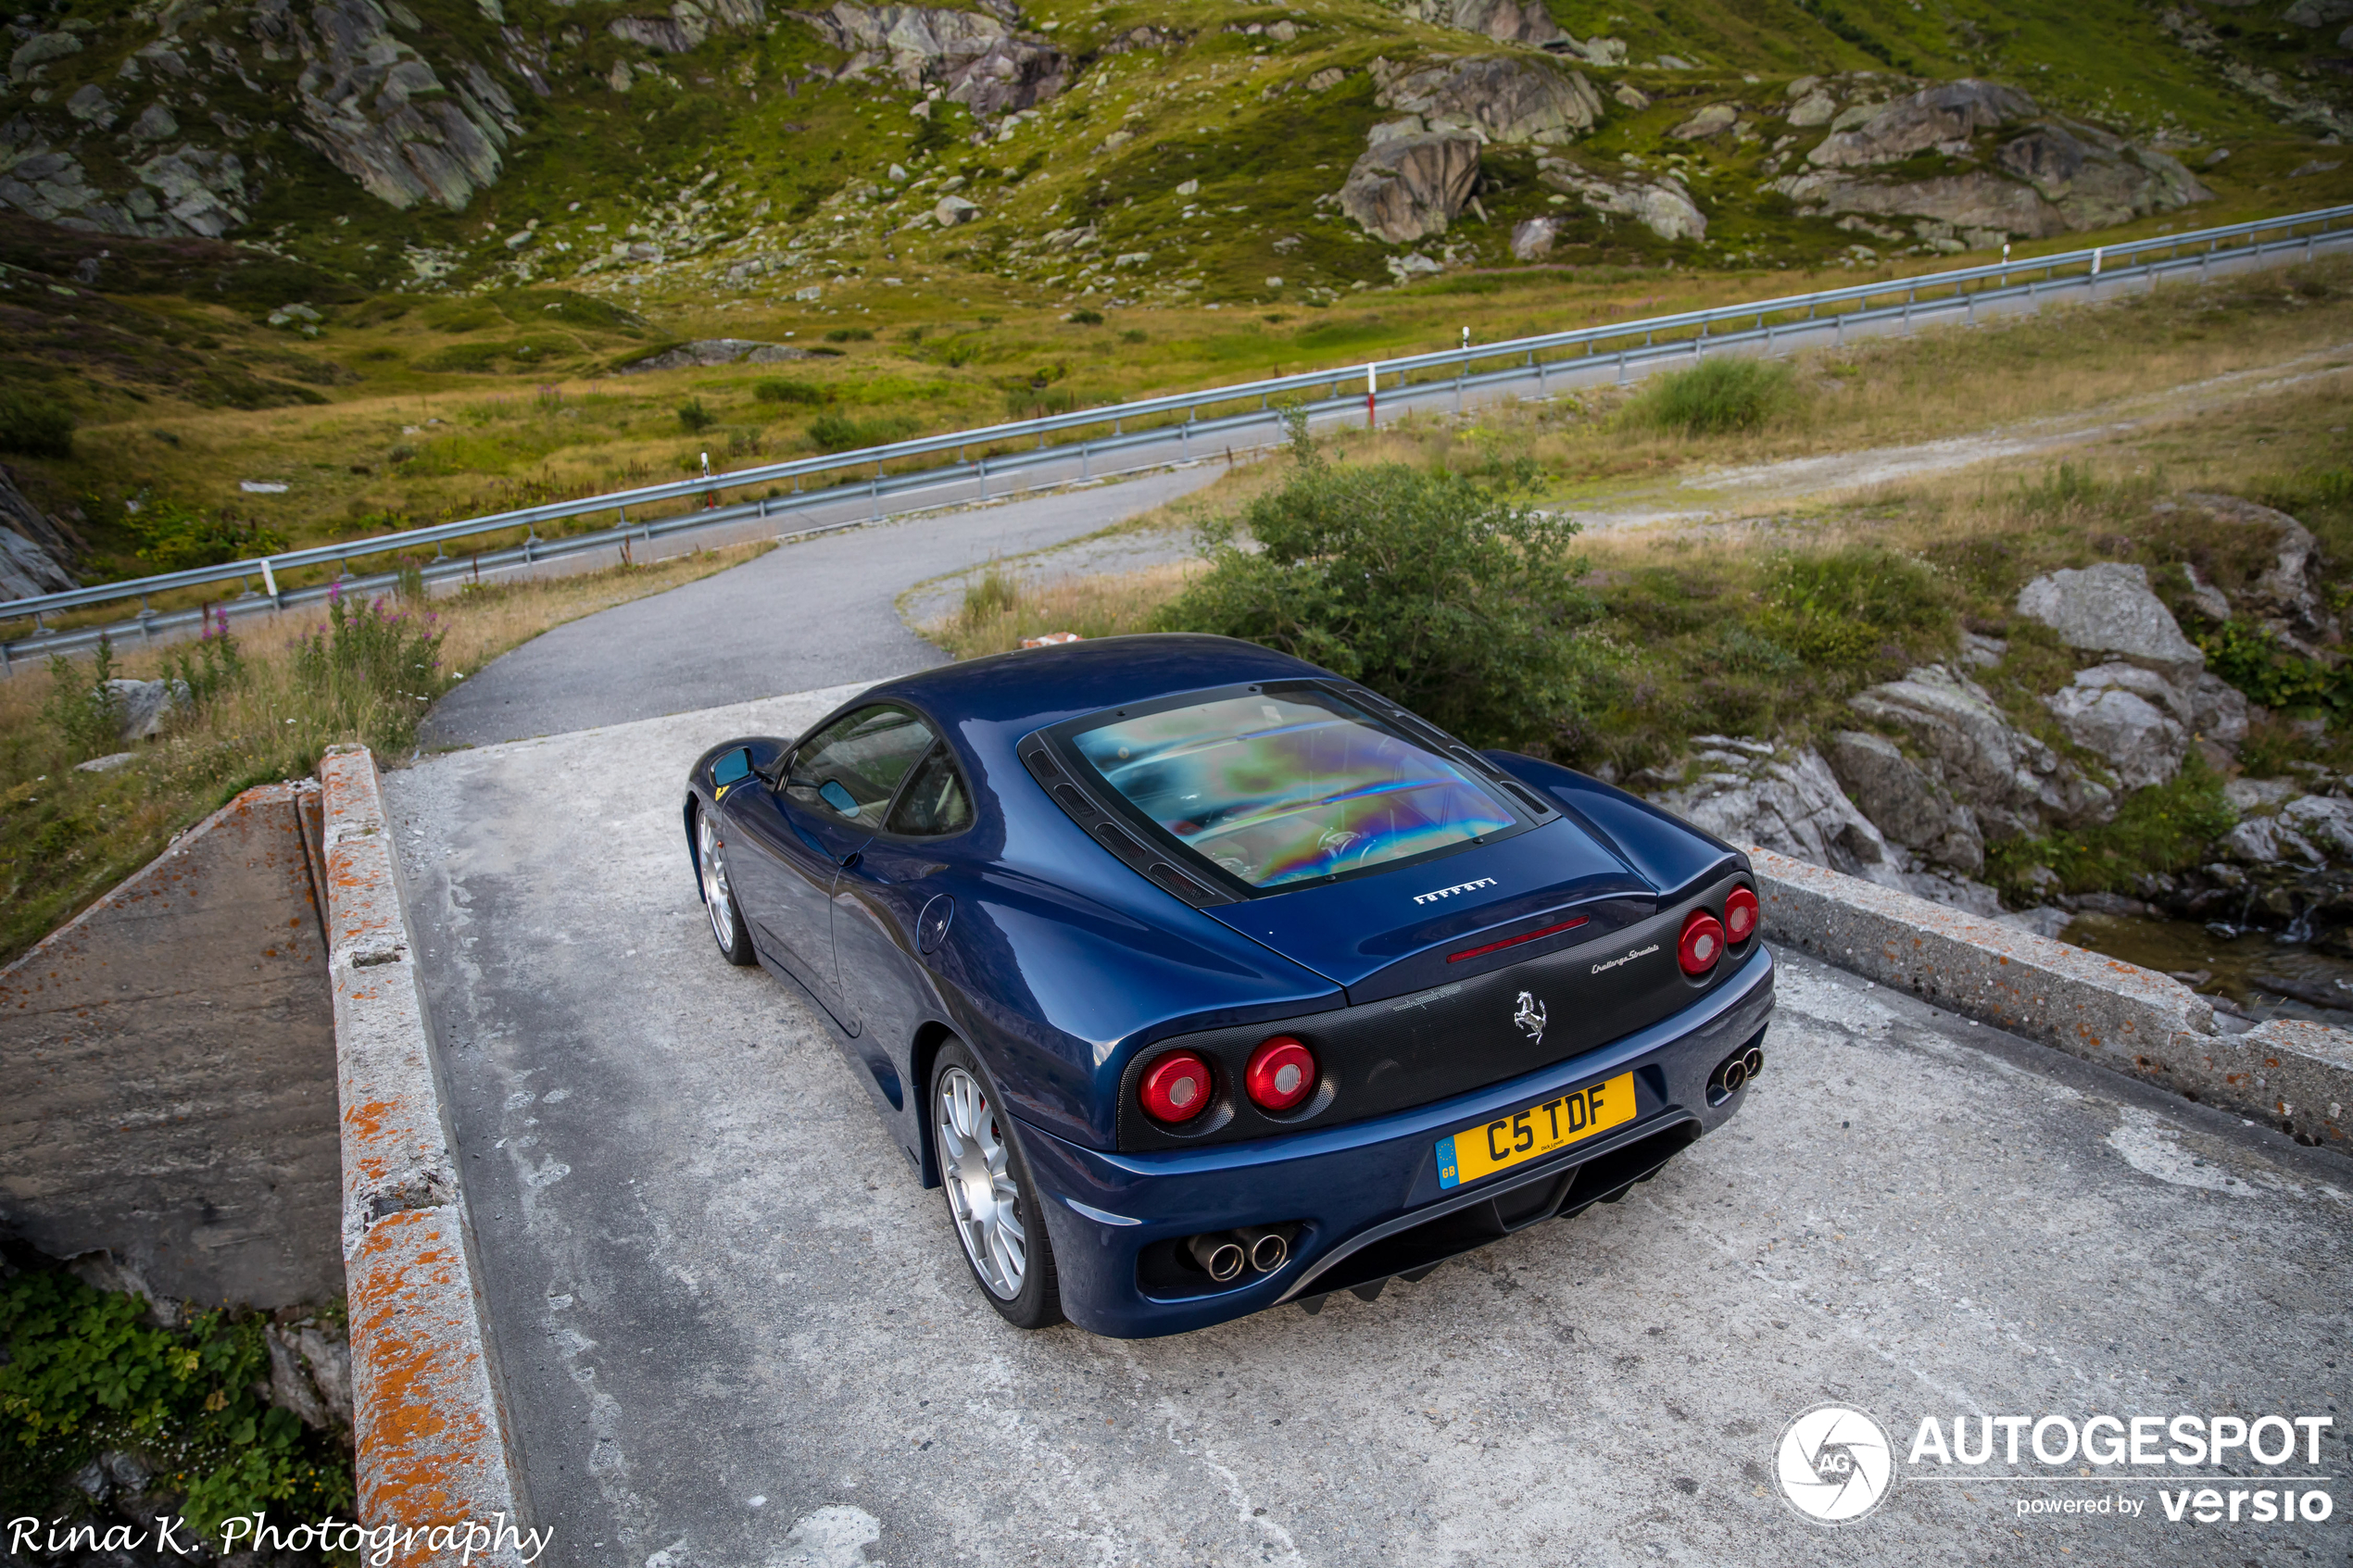 Beautiful pictures of an equally beautiful Challenge Stradale